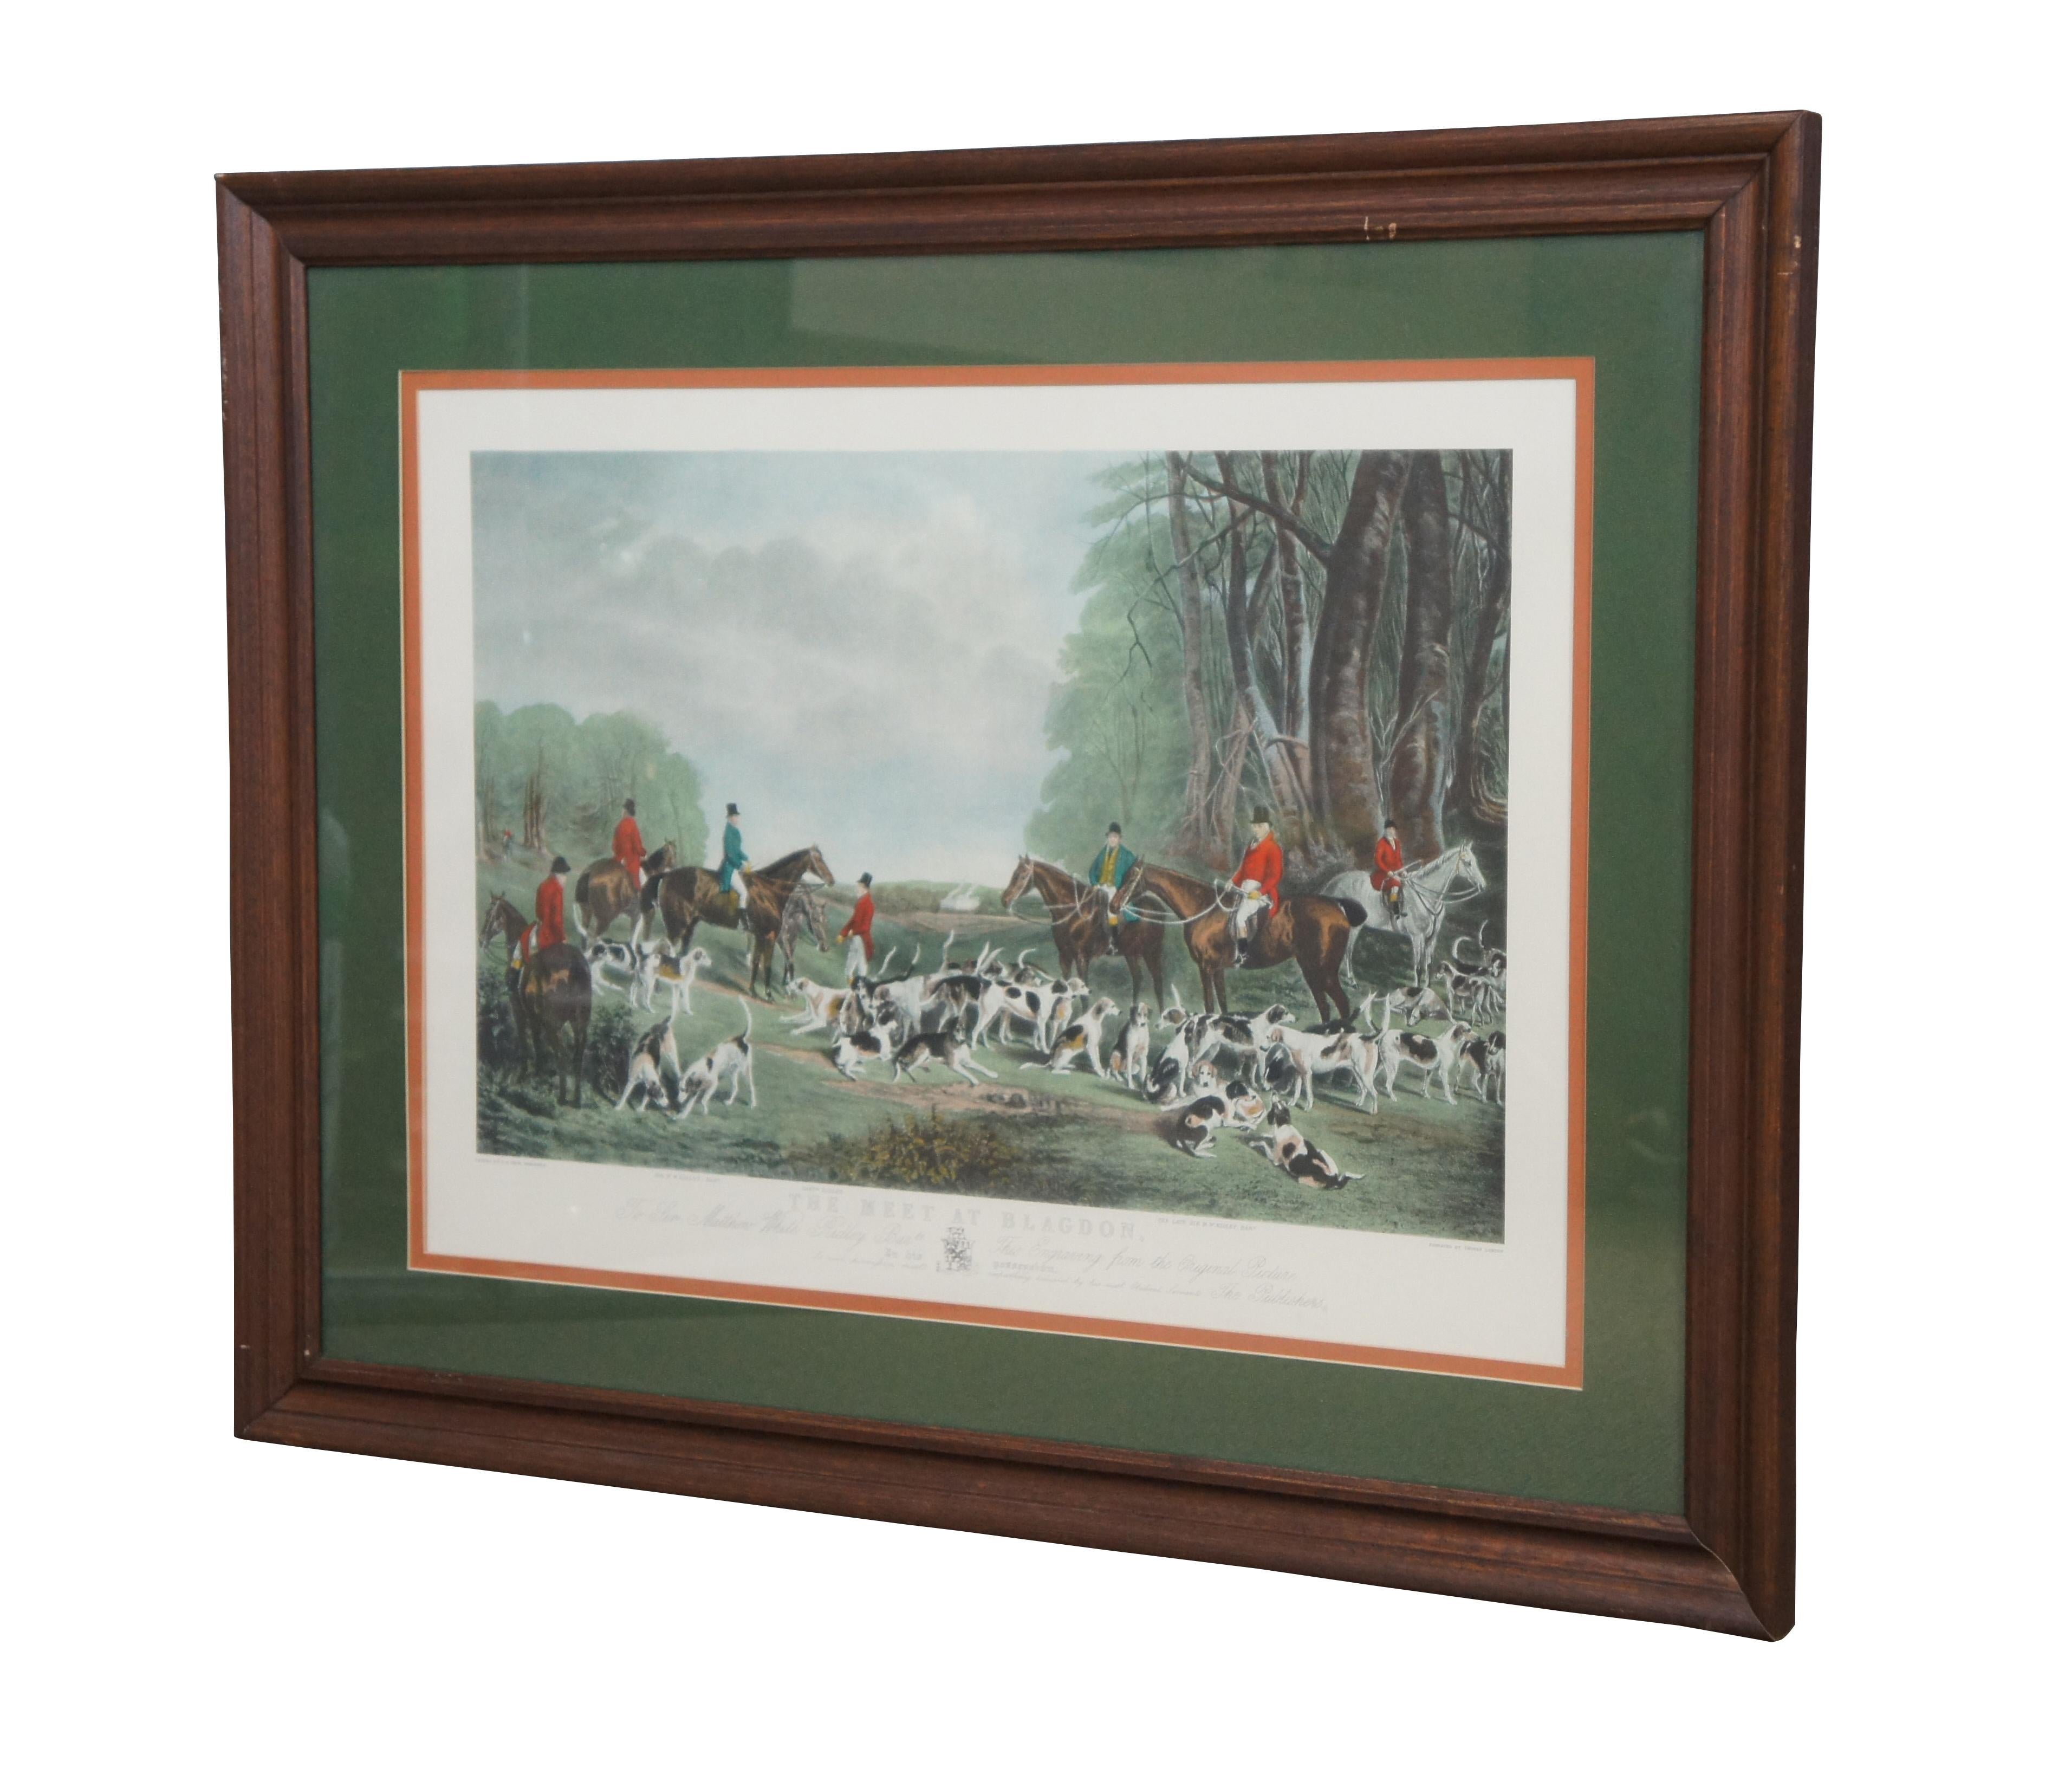 Antique 19th century hand colored engraving titled The Meet at Blagdon, original painted by J.W. Snow, engraved by Thomas Lurton. Features an English equestrian landscape fox hunt scene with horses, hounds and hunters.

“John Wray Snow (1801 -